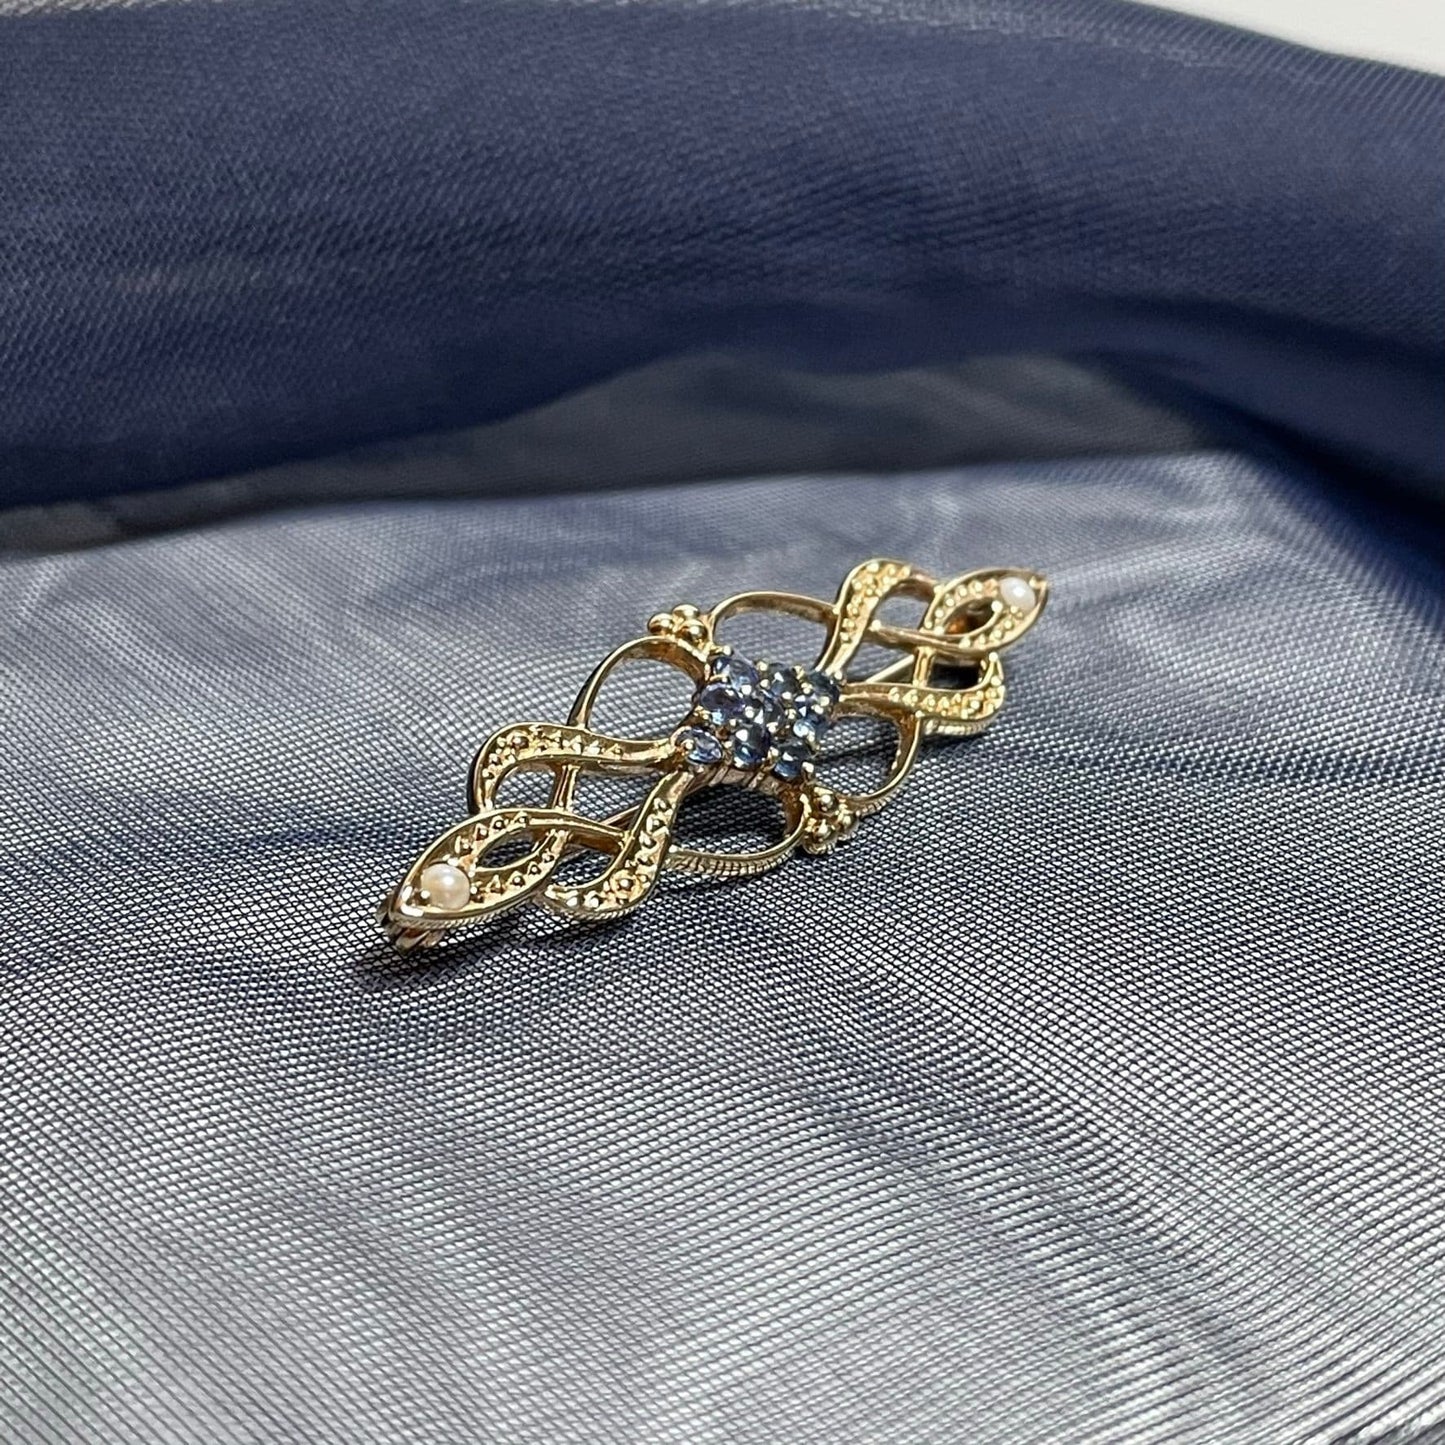 Sapphire and Cultured Pearl Brooch Gold